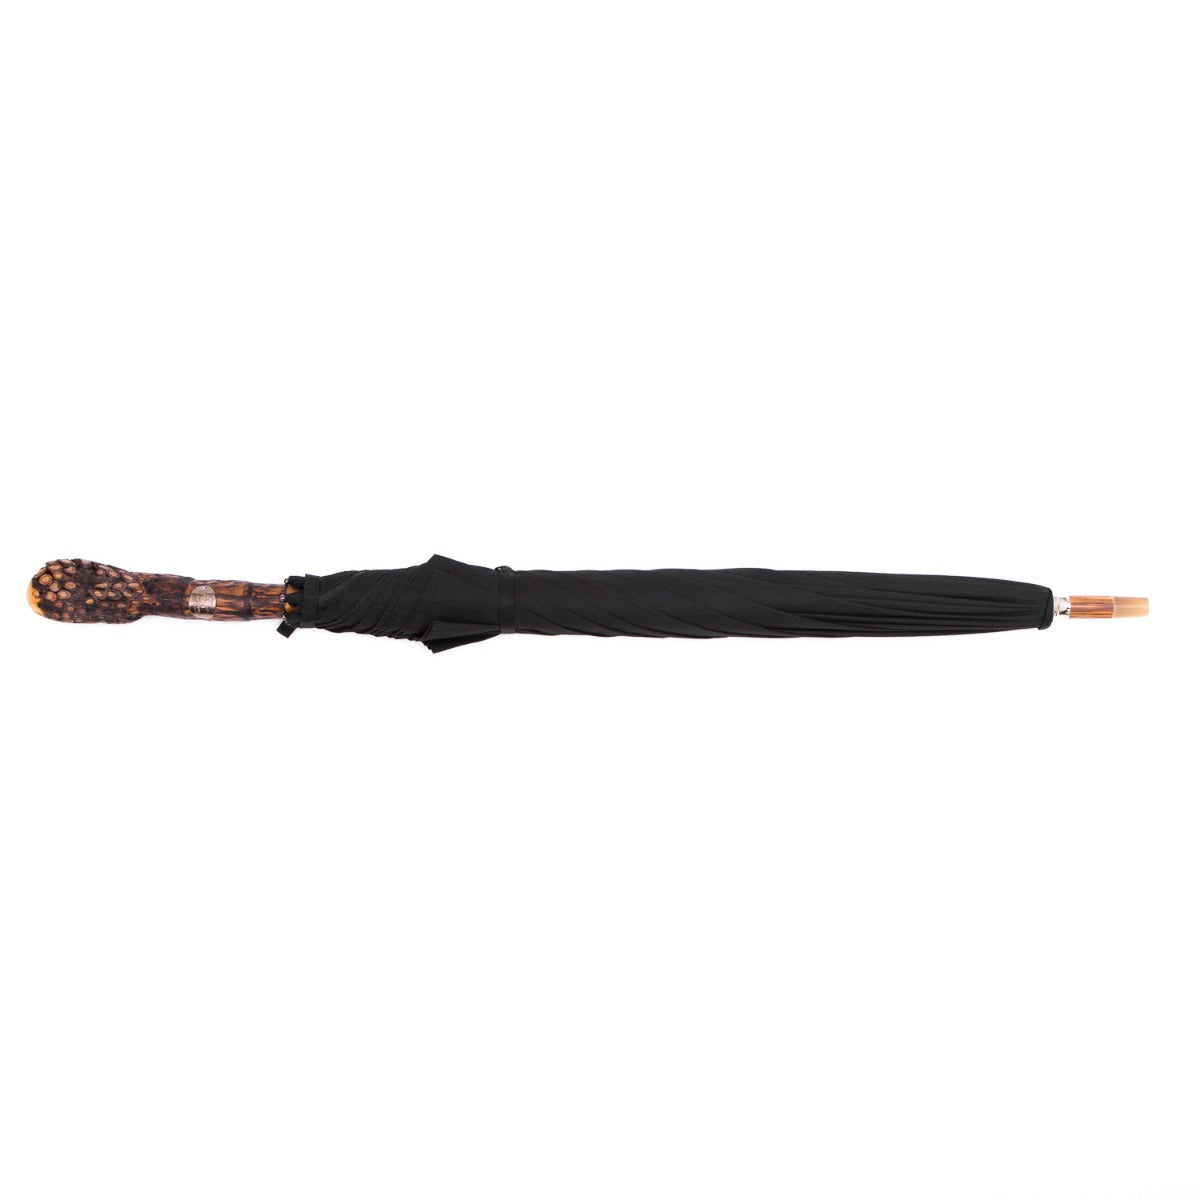 A Manila Root Solid Stick umbrella with an Imperial Black canopy from KirbyAllison.com.